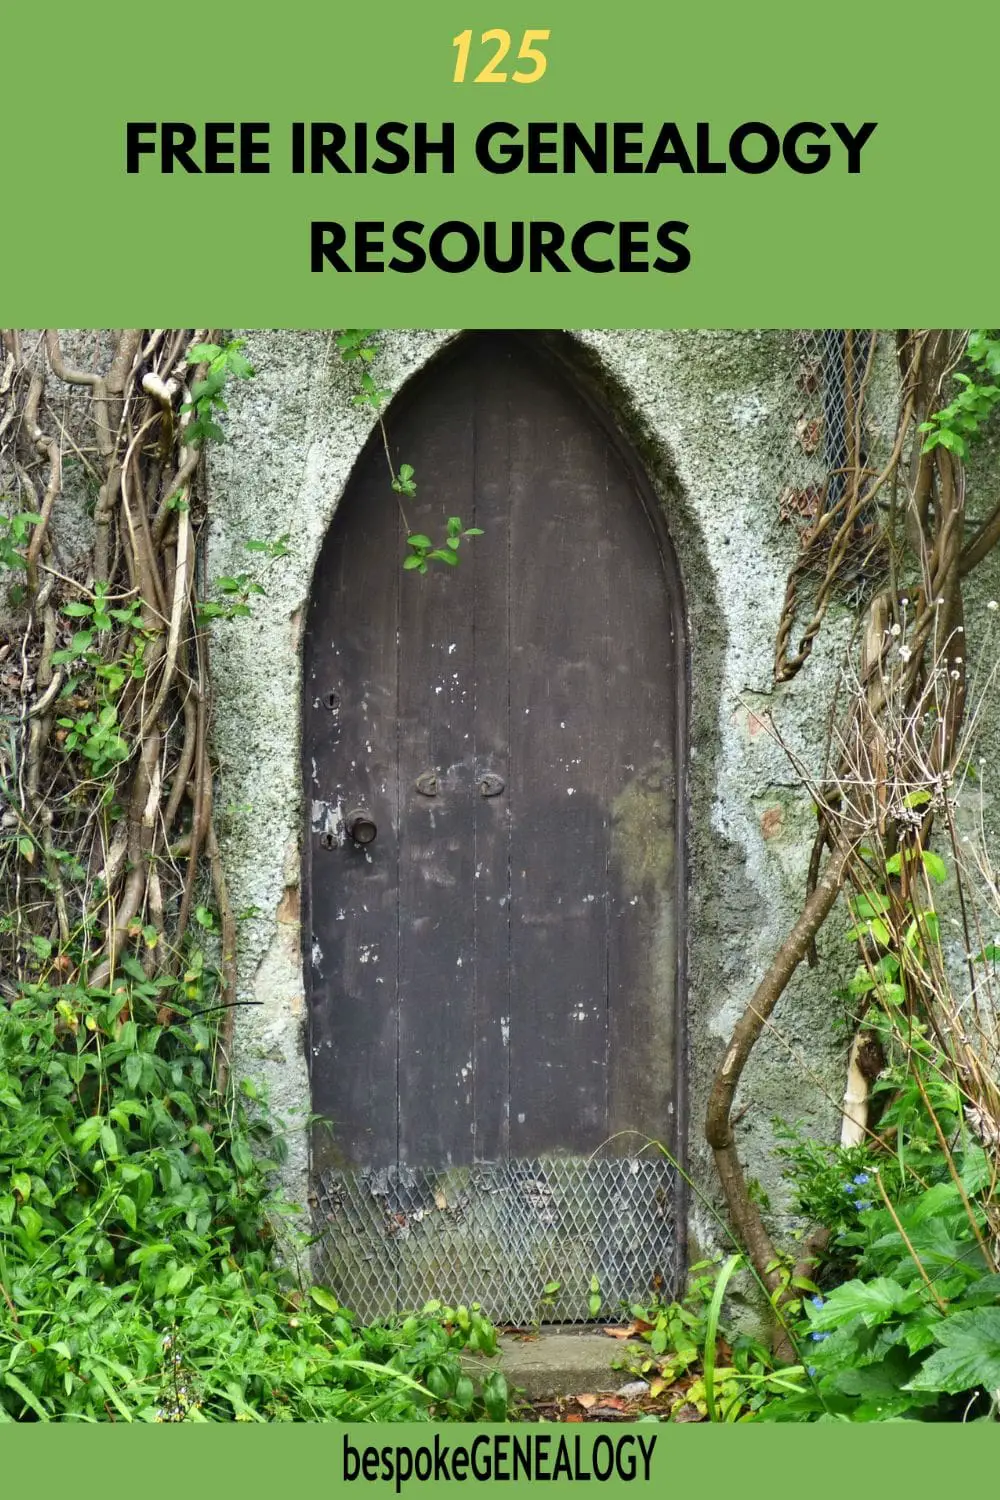 125 Free Irish Genealogy Resources. Photo of an old arched doorway in undergrowth.